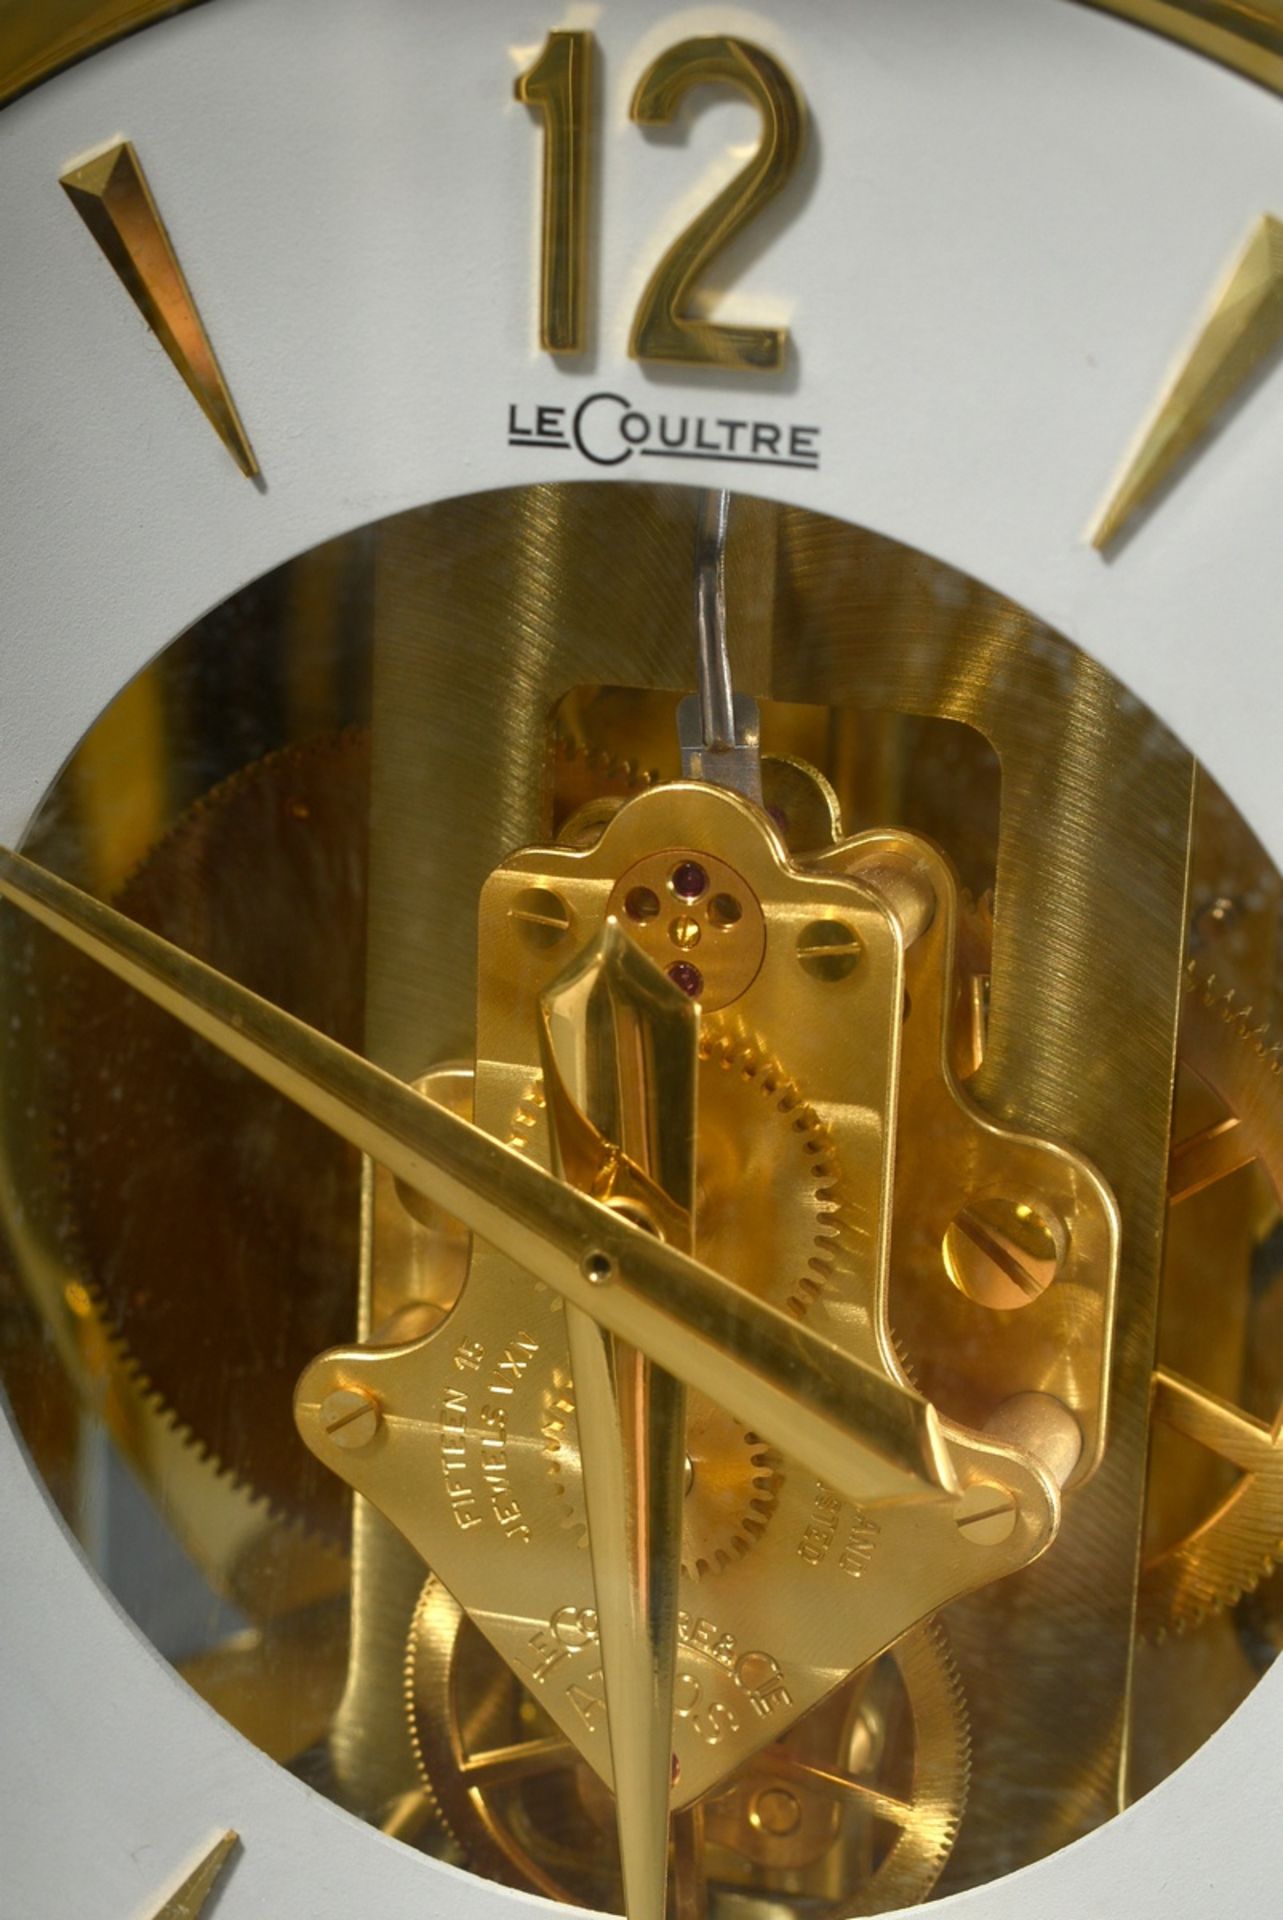 Jaeger Le Coultre "Atmos" table clock, glazed gold-plated brass case, movement number 196633, 23.5x - Image 3 of 7